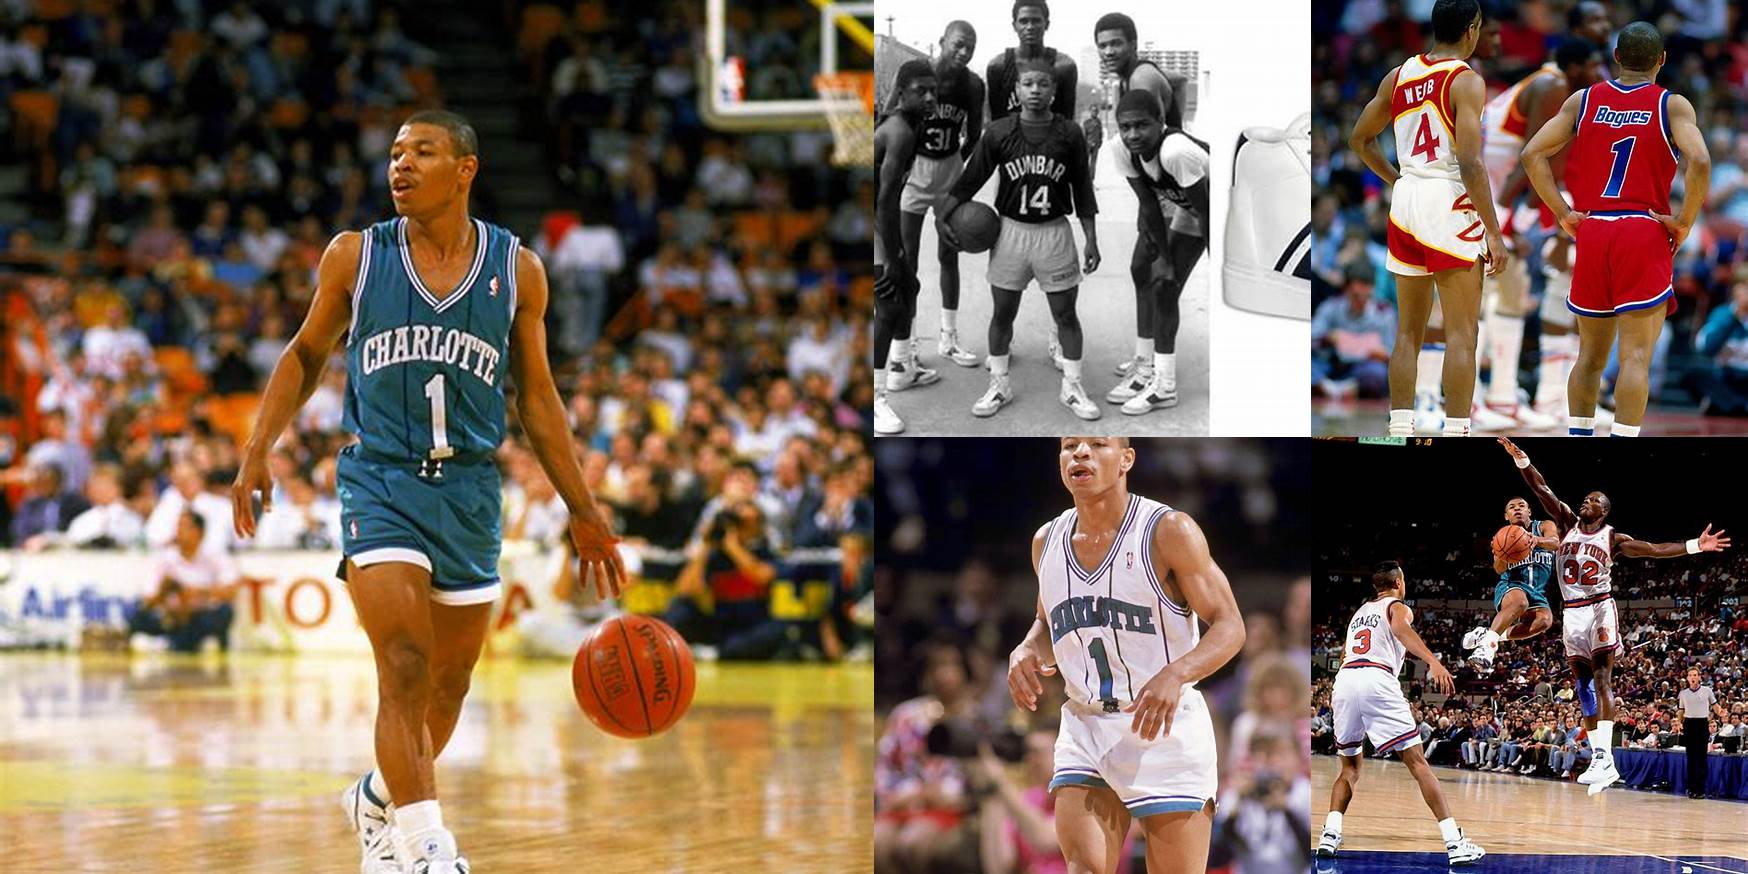 What Size Shoe Does Muggsy Bogues Wear